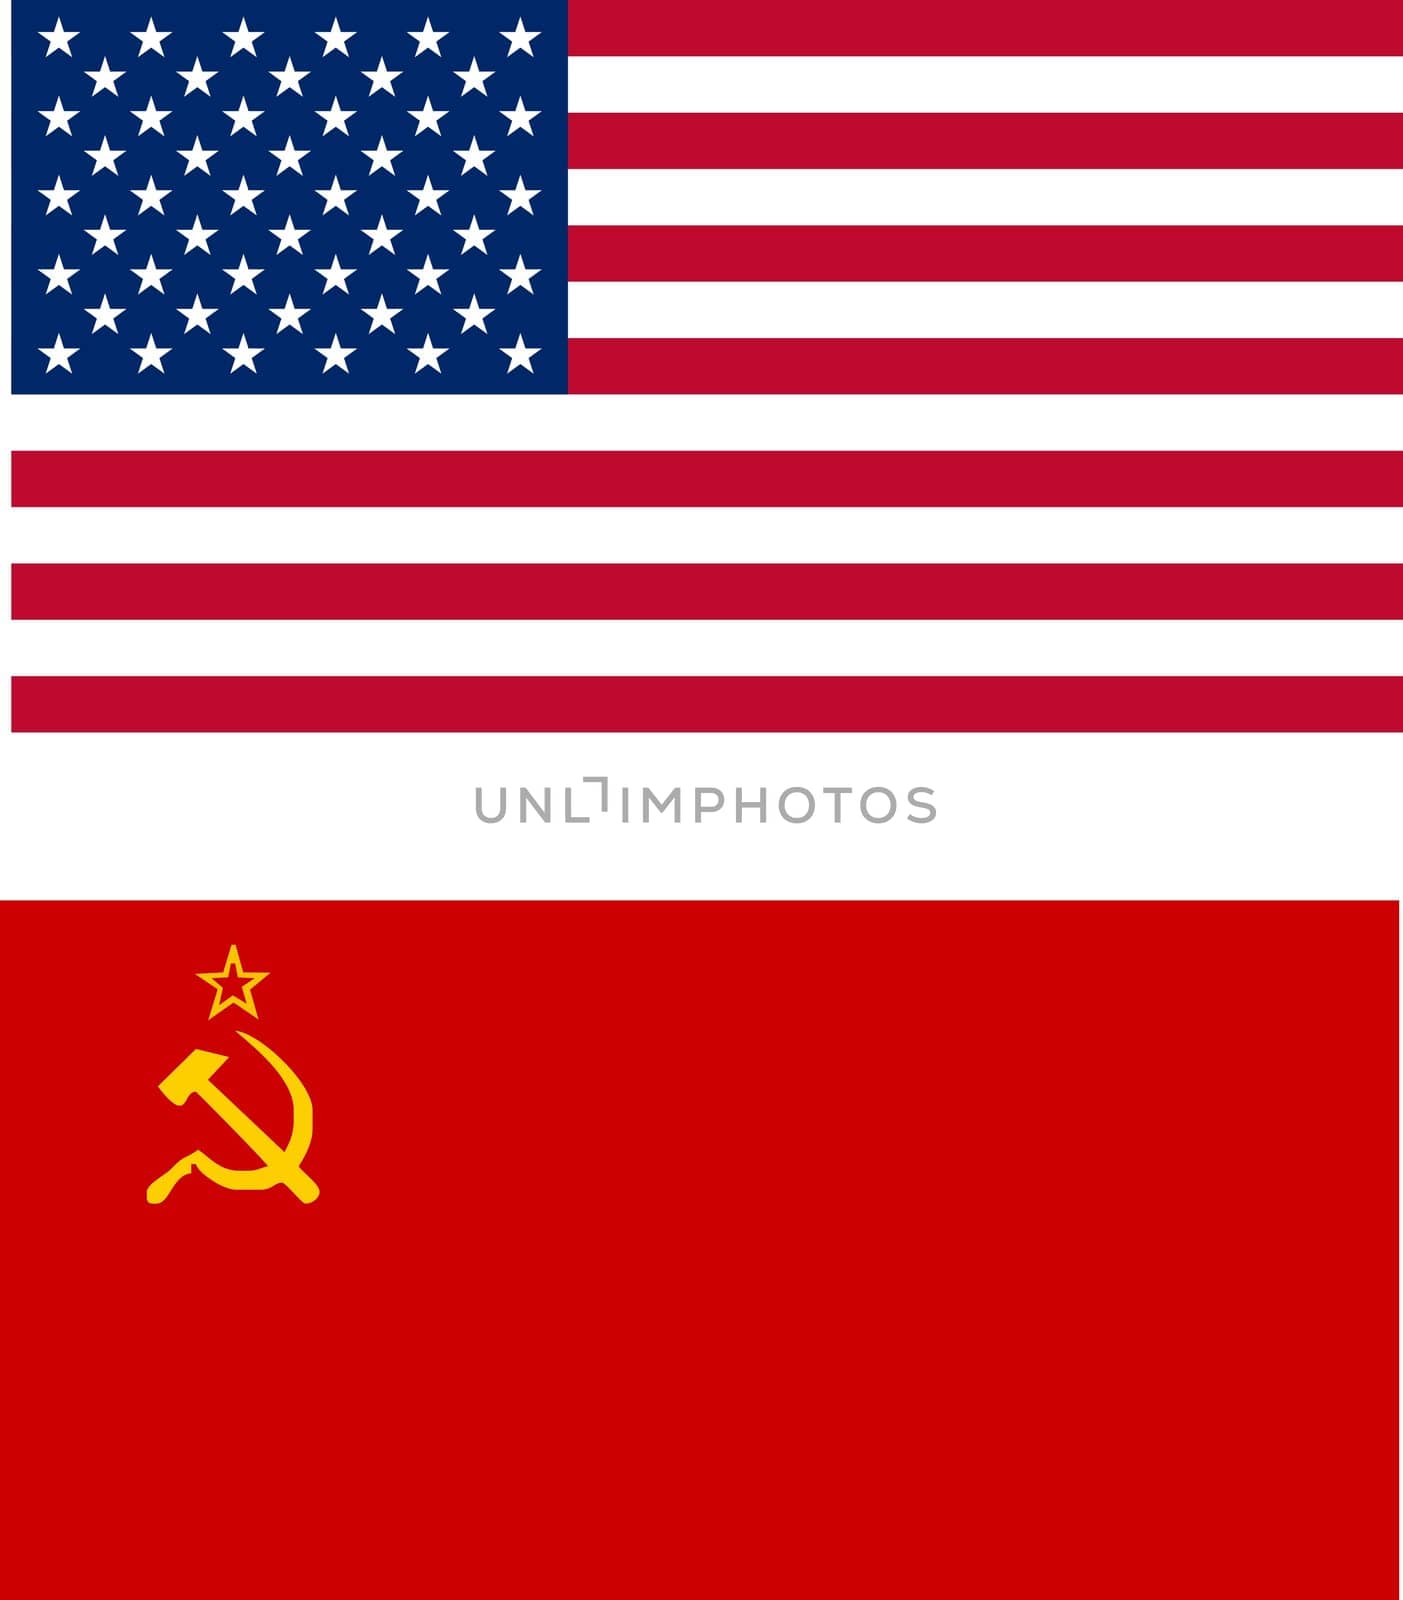 USA and USSR flags by paolo77